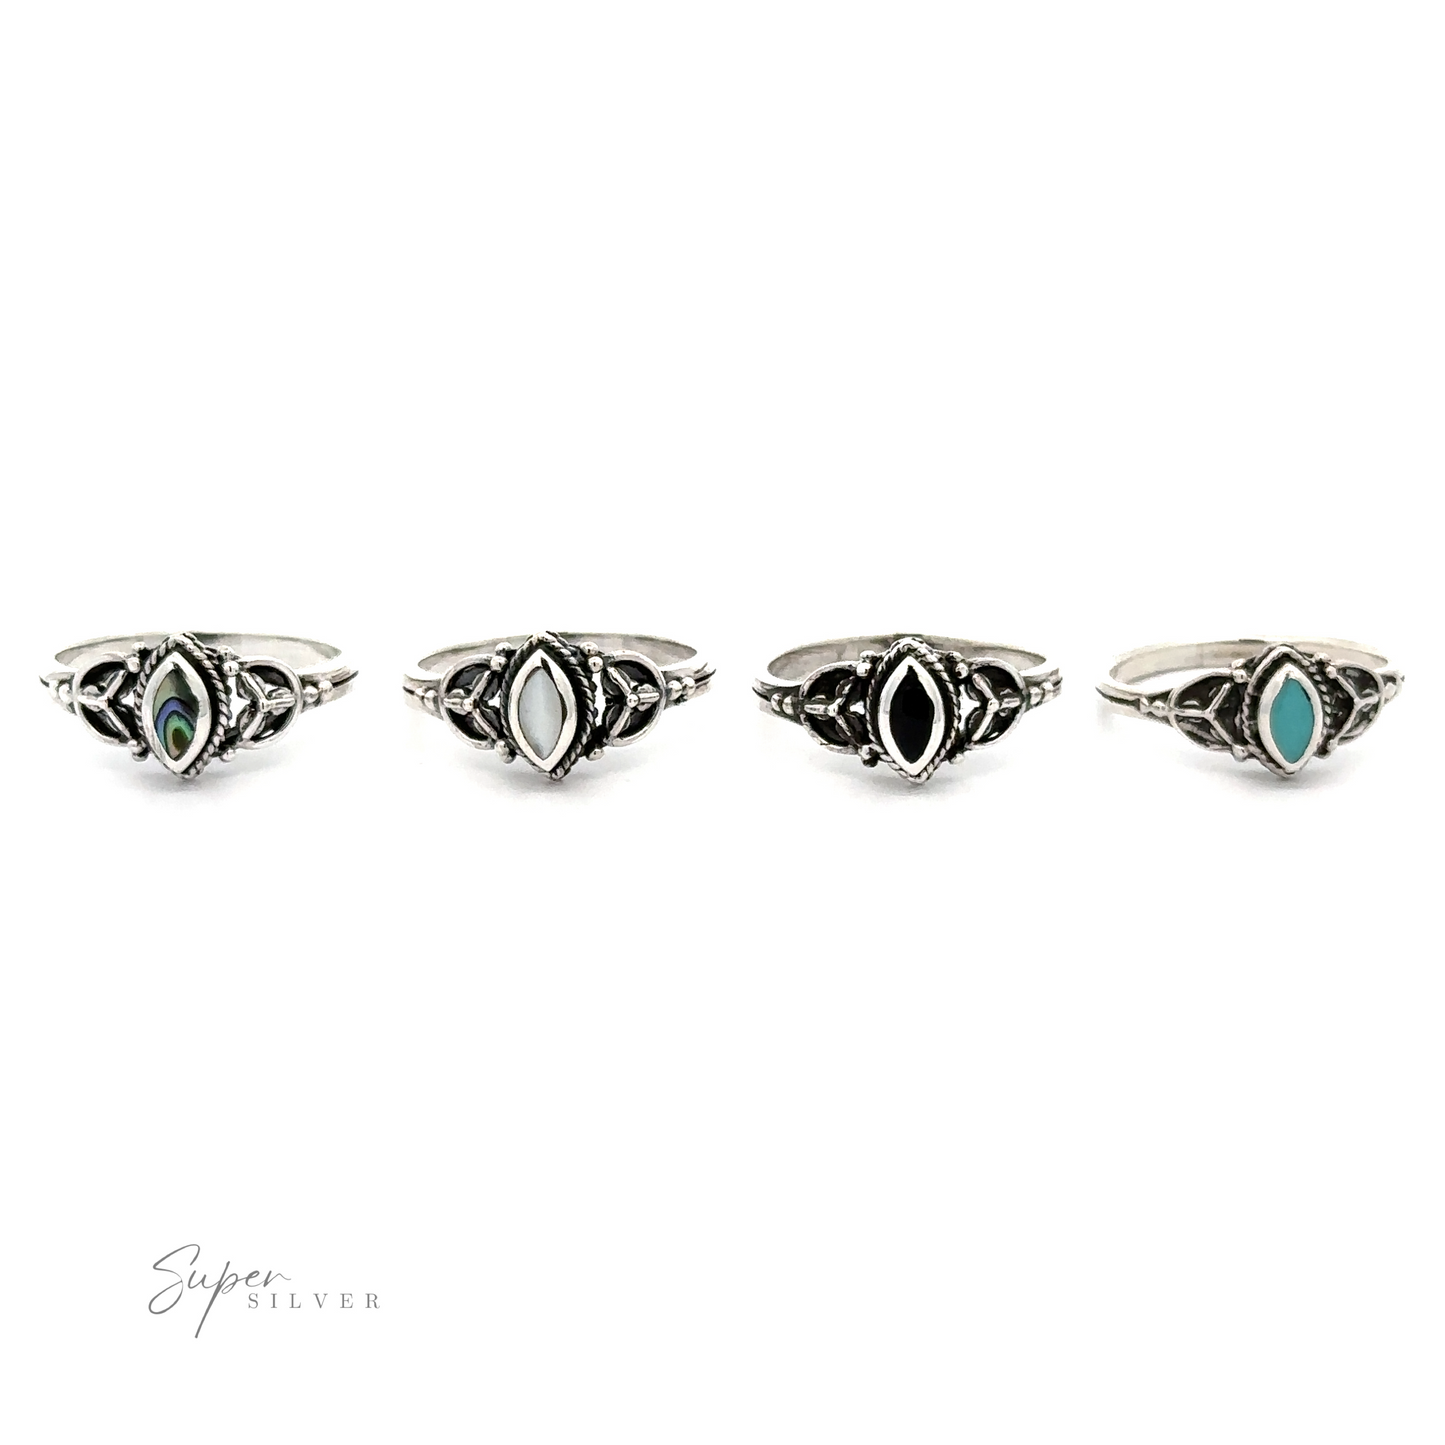 A set of four fashionable Tiny Marquise Inlay Stone Rings with a vintage look and featuring turquoise stones.